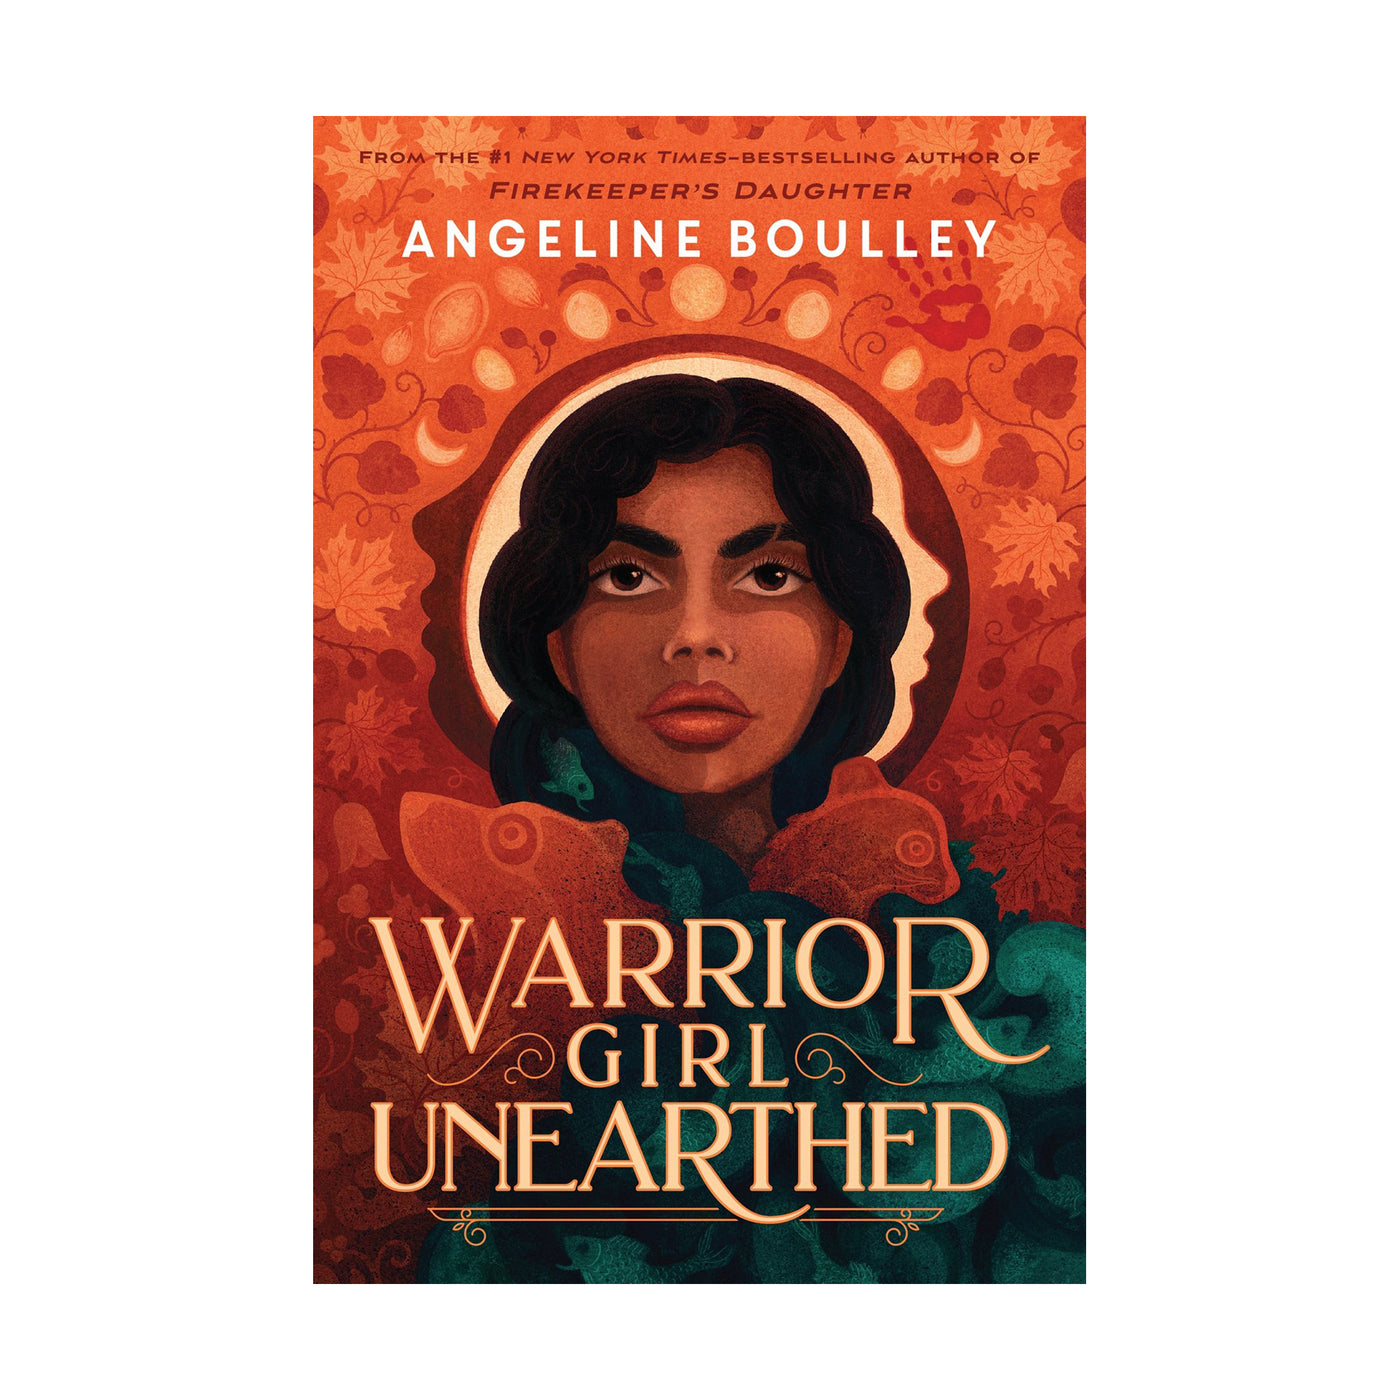 Warrior Girl Unearthed - Signed